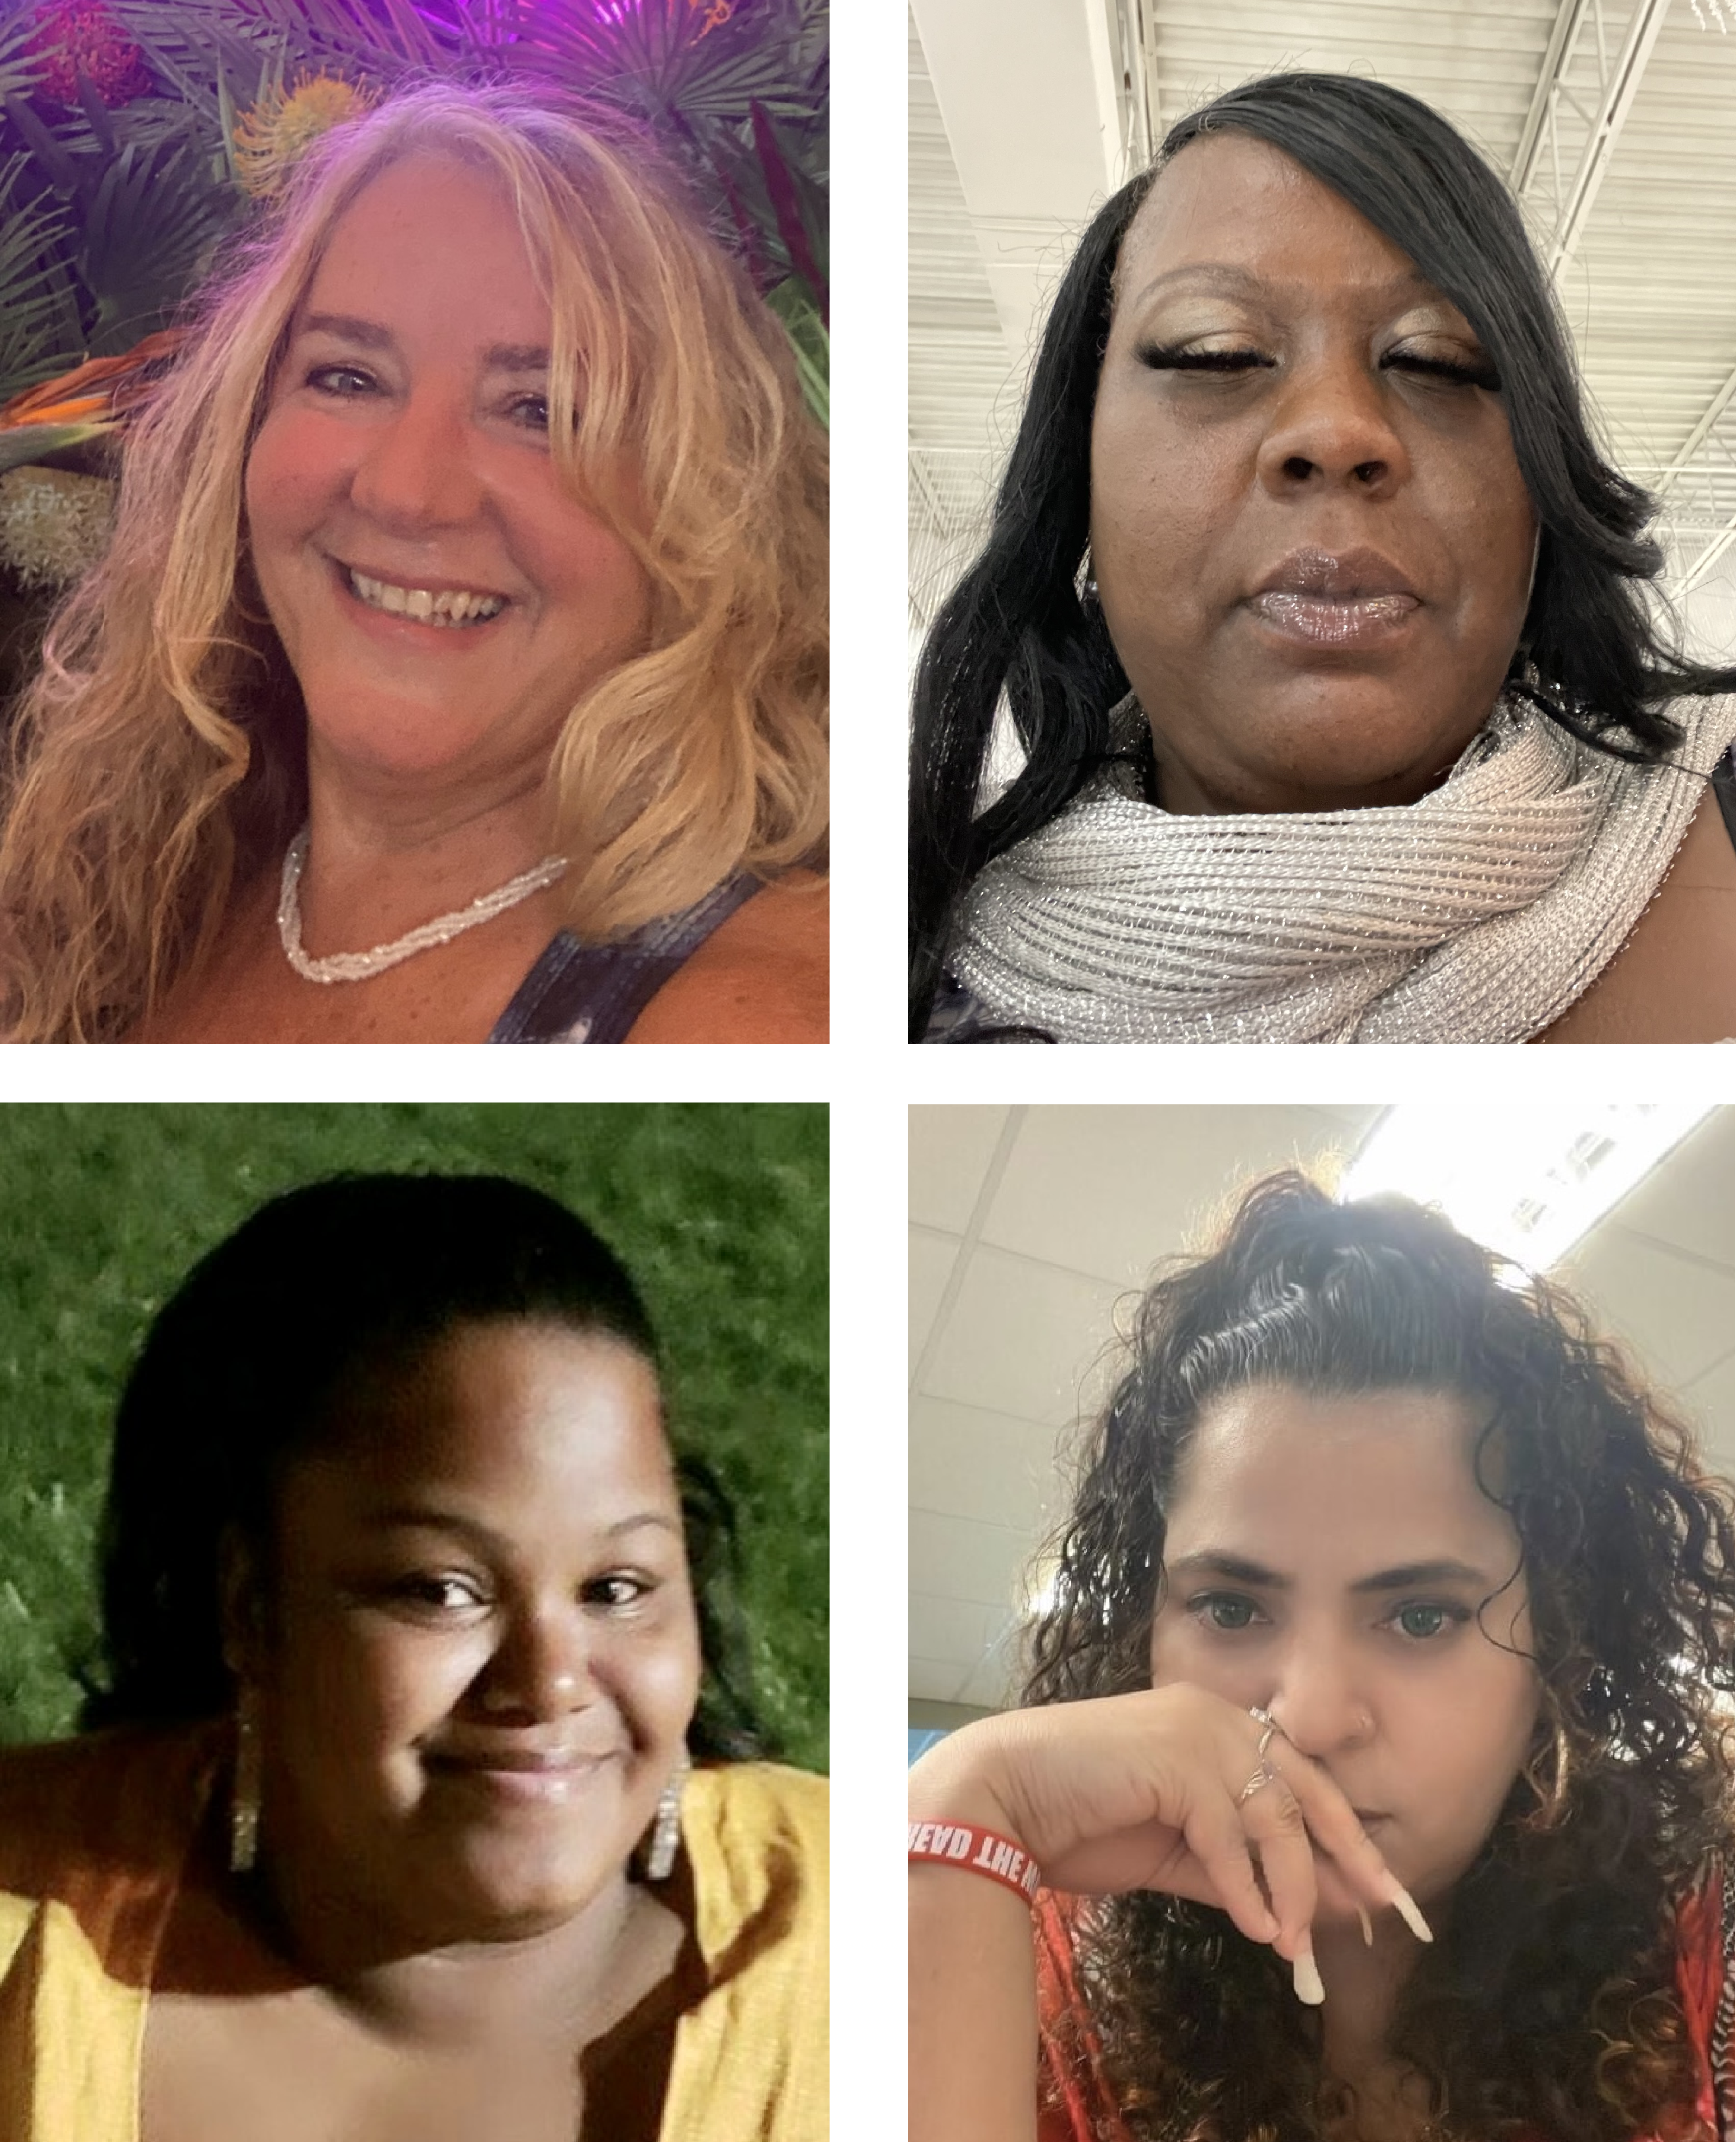 Photo of four women. On the top left is Mary Lou "Lu" Freitas, a white woman with long curly blond hair wearing a pearl necklace. On the top right is Quiana Mayo, a Black woman with long straight black hair wearing a tan scarf. On the bottom left is Sierra Scott, a Black woman medium straight black hair wearing hoop earrings and a yellow top. On the bottom right is Jossie Torres, a Latina woman with long curly black hair and long nails.